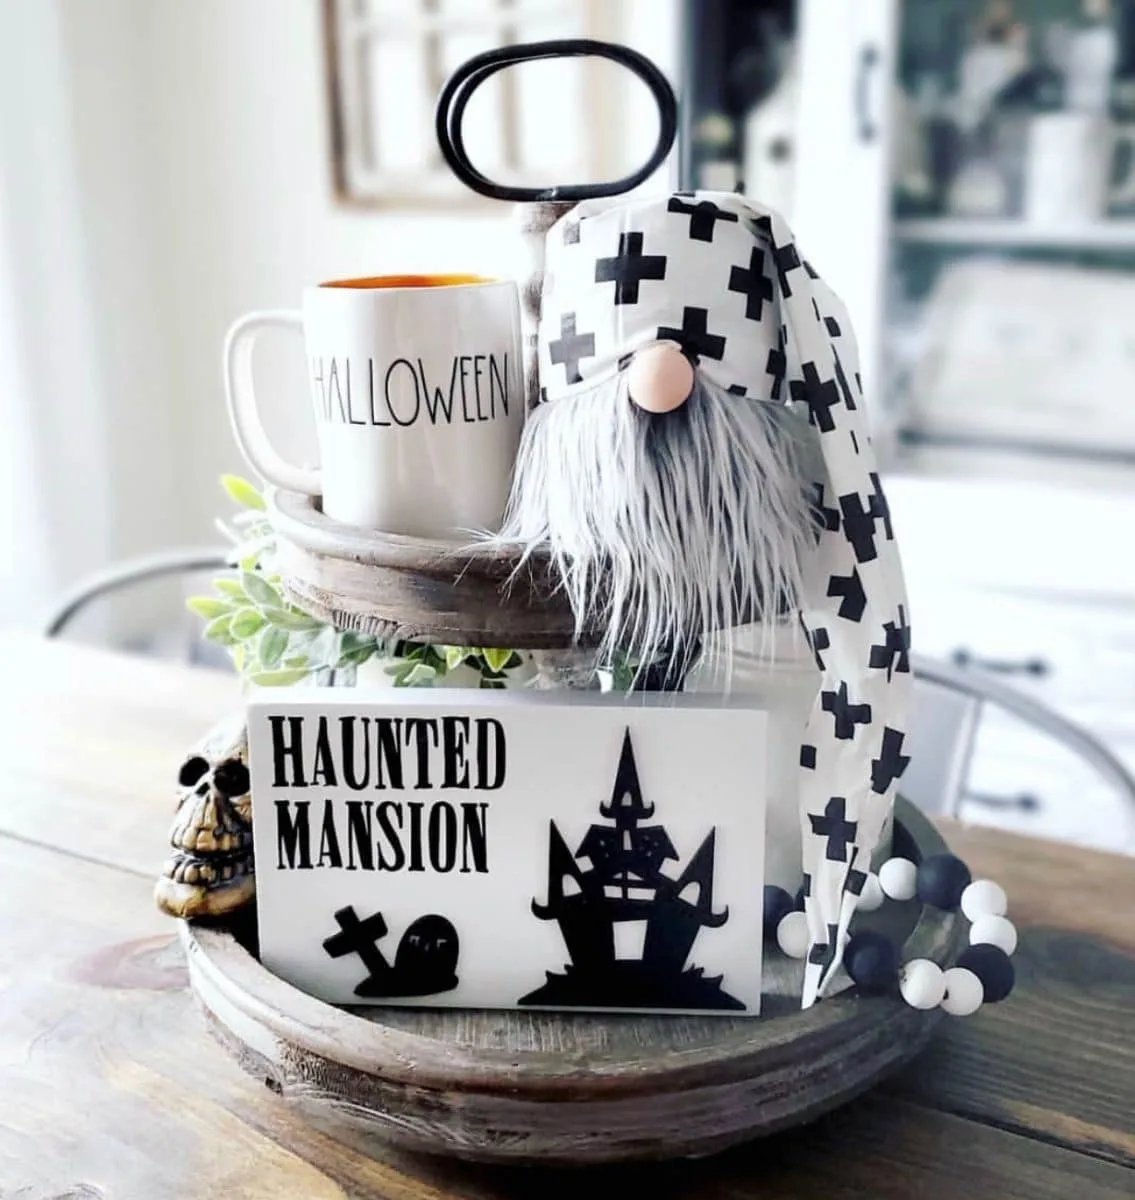 Halloween tiered tray ideas for home.  Gnome, Halloween Rae Dunn mug, haunted mansion sign, black and white wood beads, skeleton